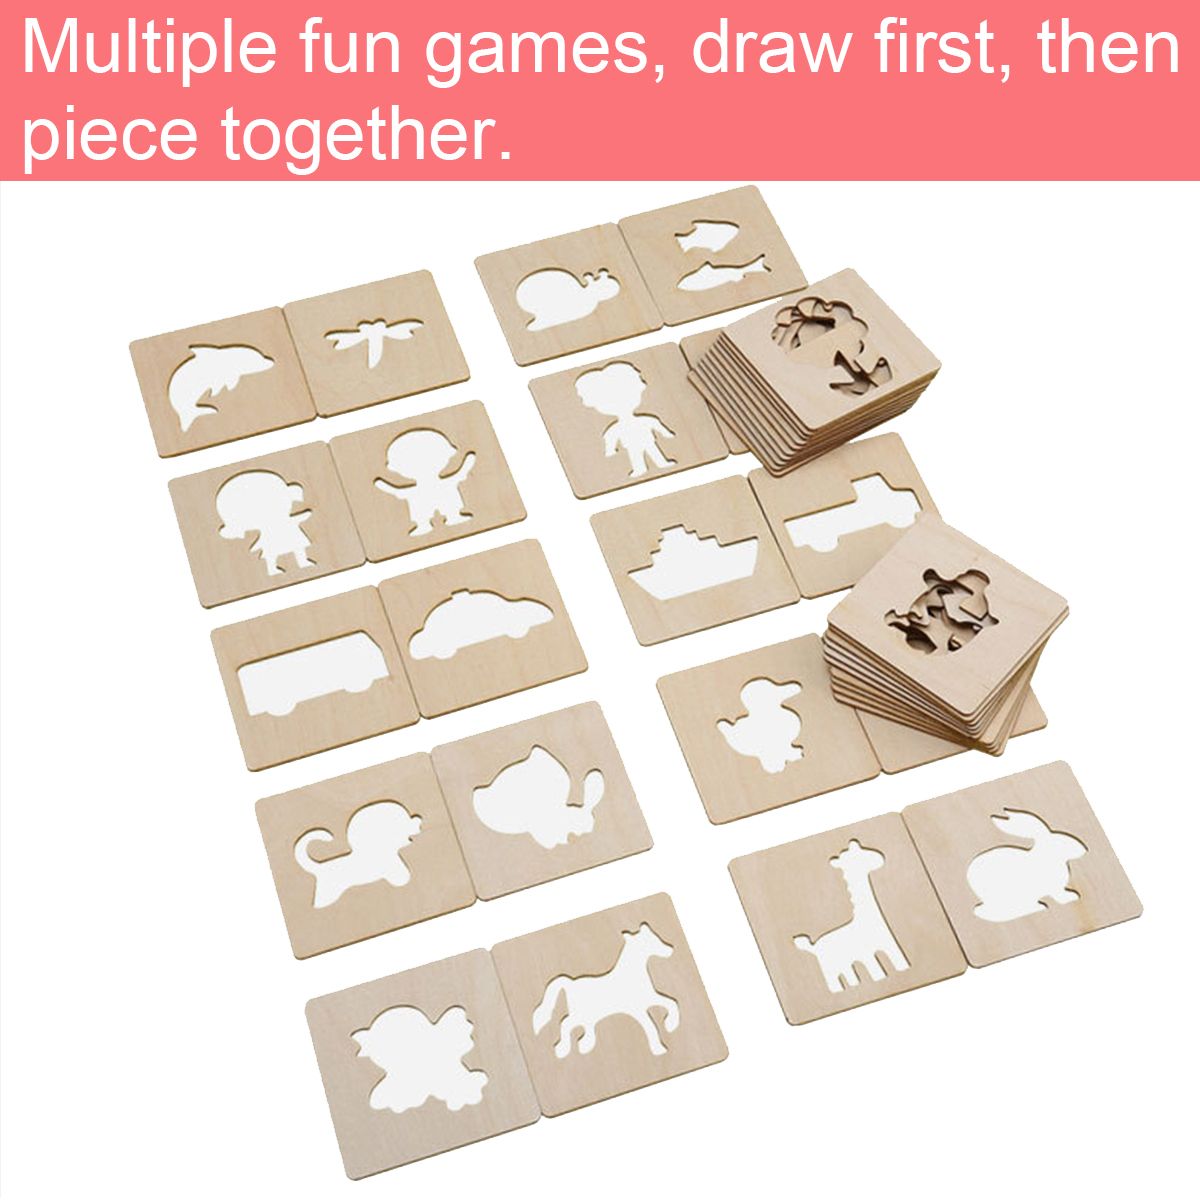 243660x-Color-Painting-Tools-Kit-Painting-Template-Graffiti-Kid-Handmade-Wooden-Toy-1658630